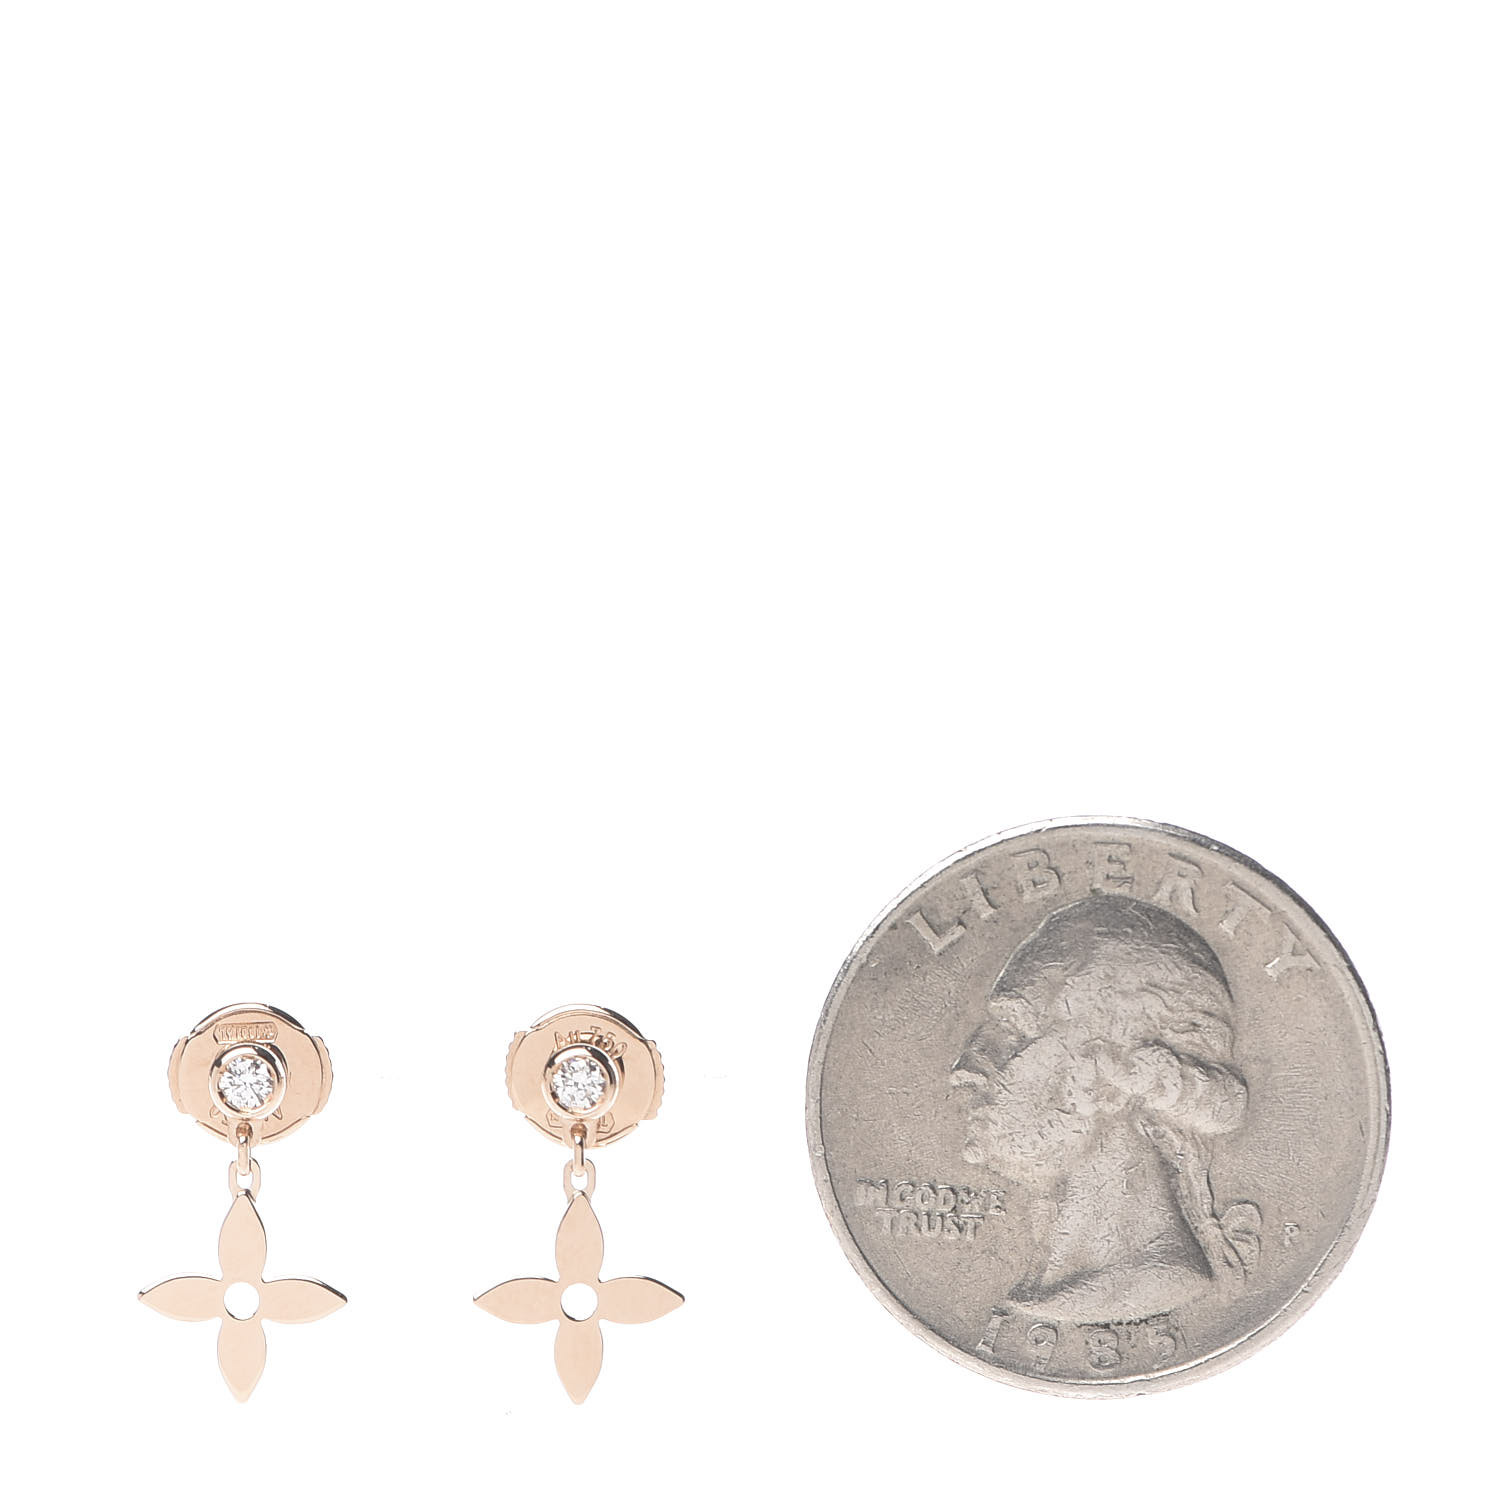 Products by Louis Vuitton: Idylle Blossom LV Ear Stud, White Gold And  Diamond - Per Unit